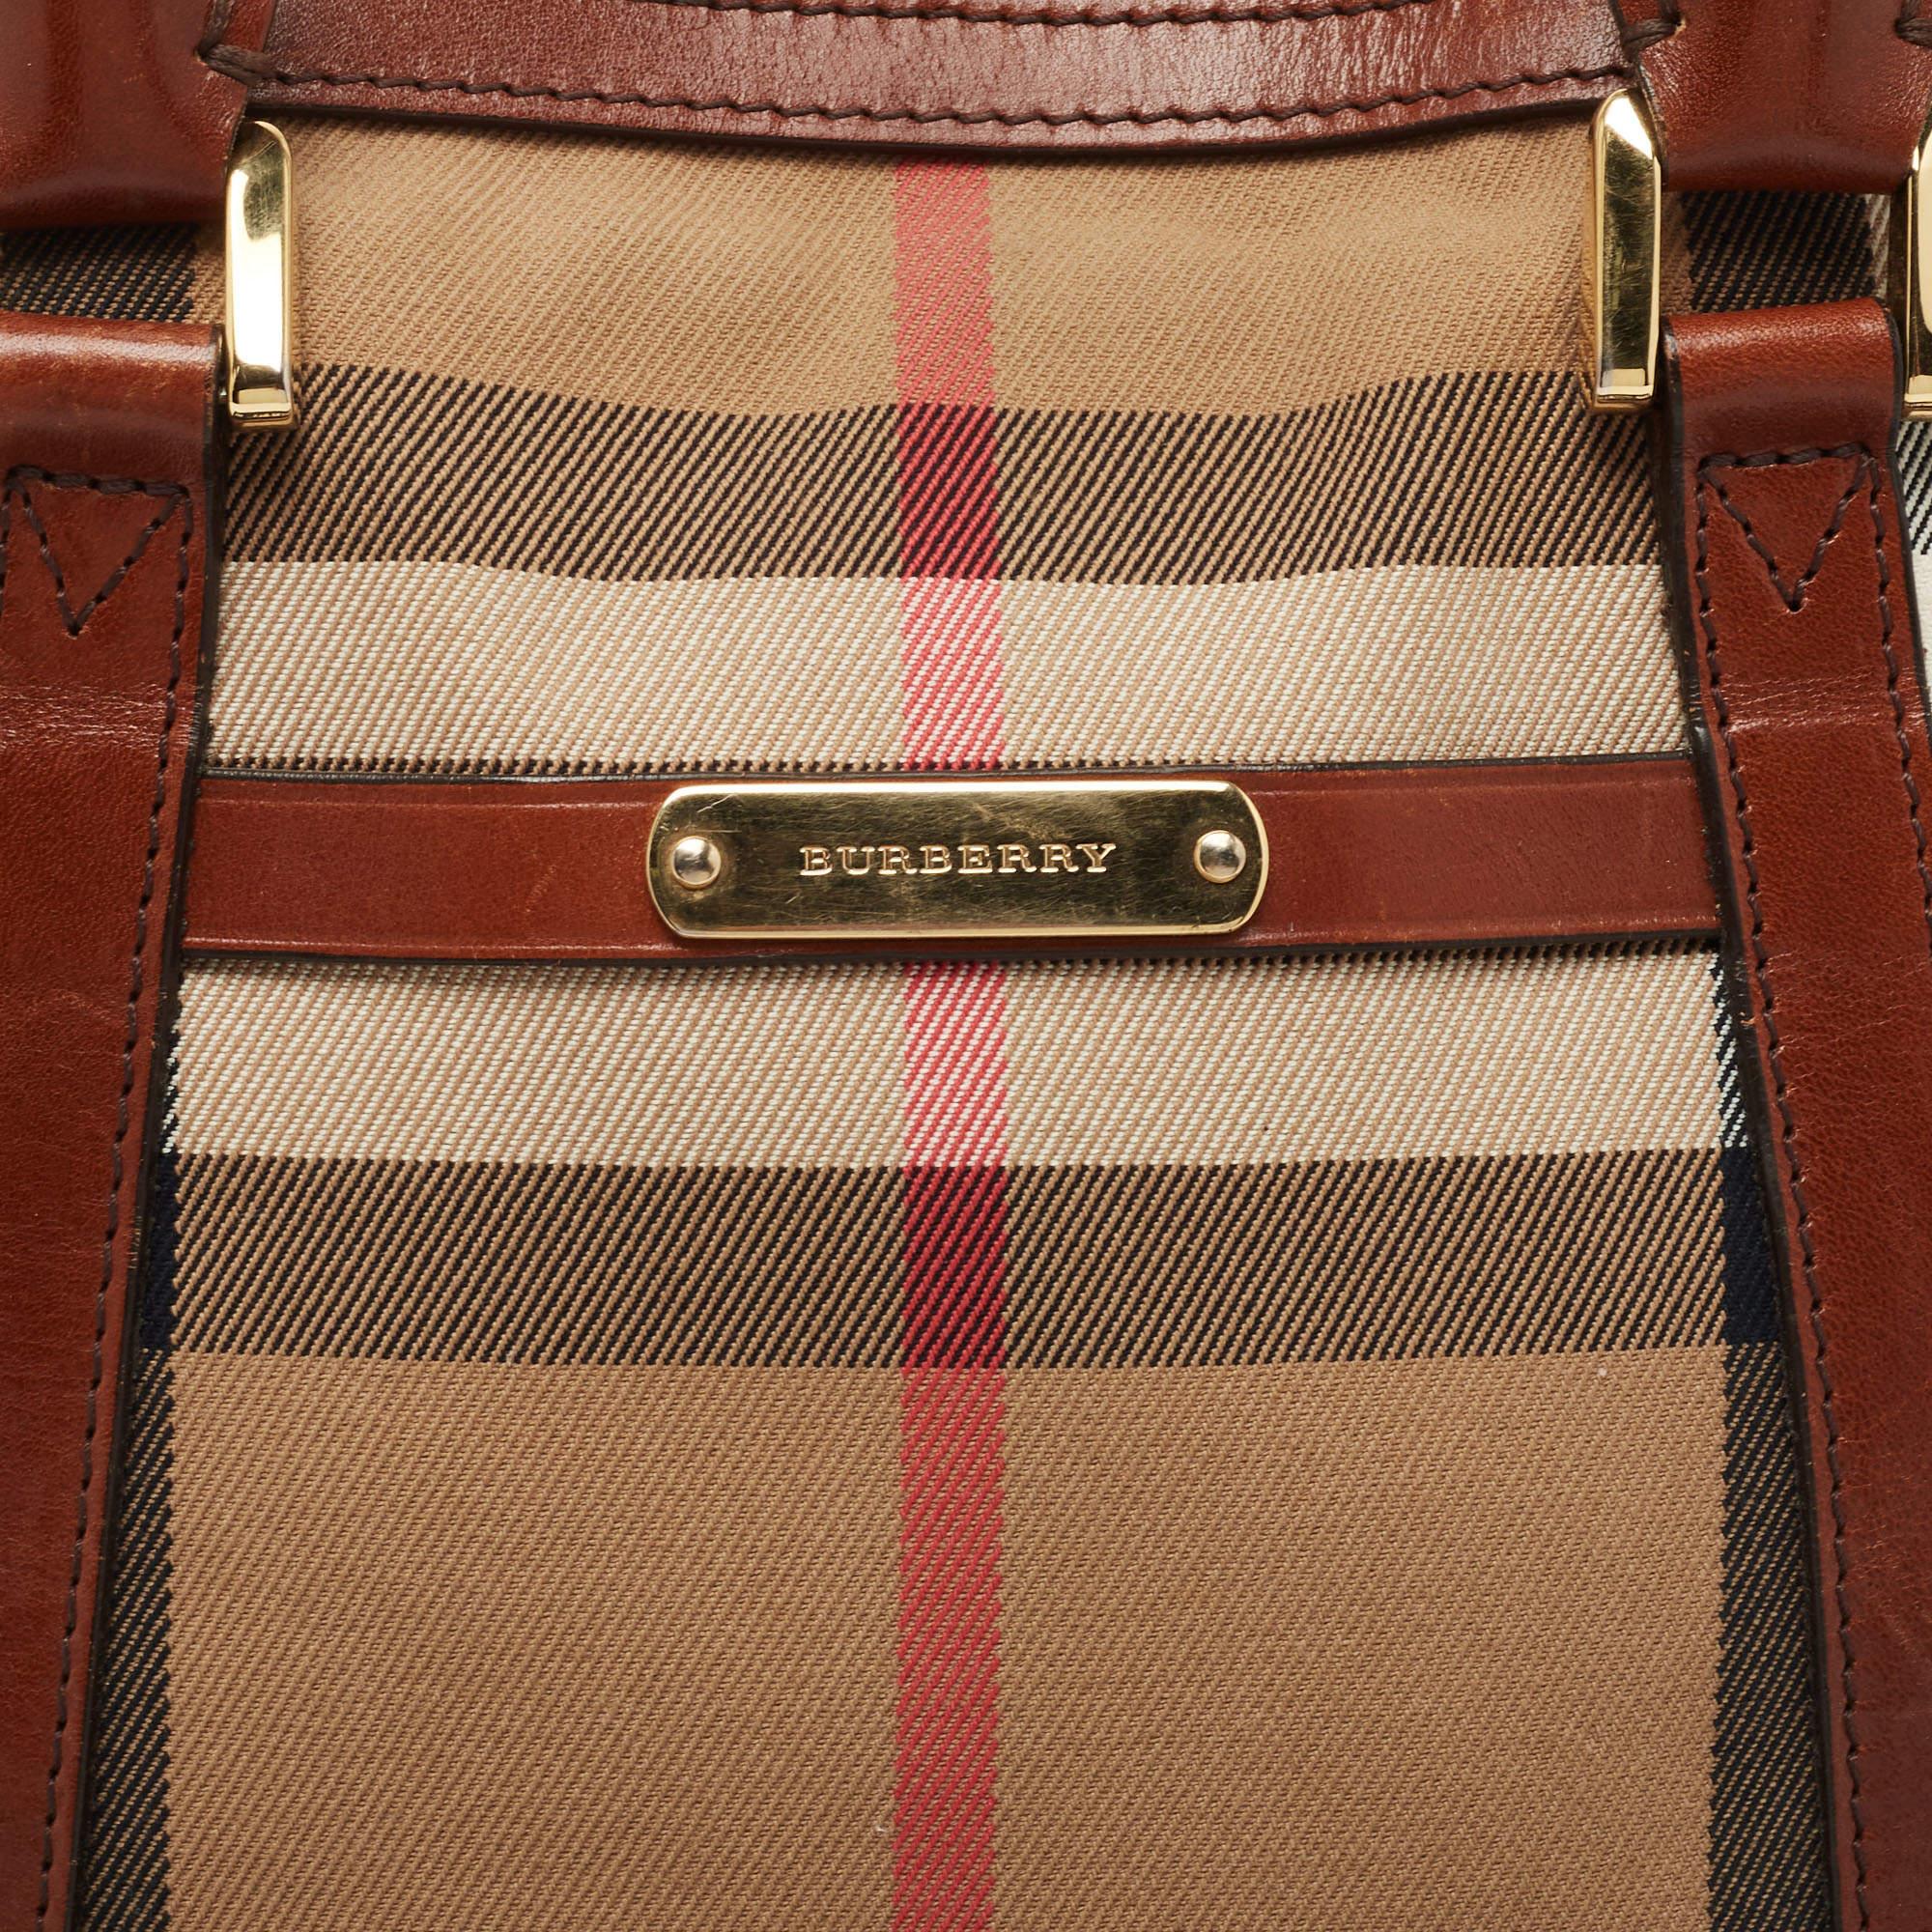 Burberry Beige/Tan House Check Fabric and Leather Orchard Bowler Bag 2